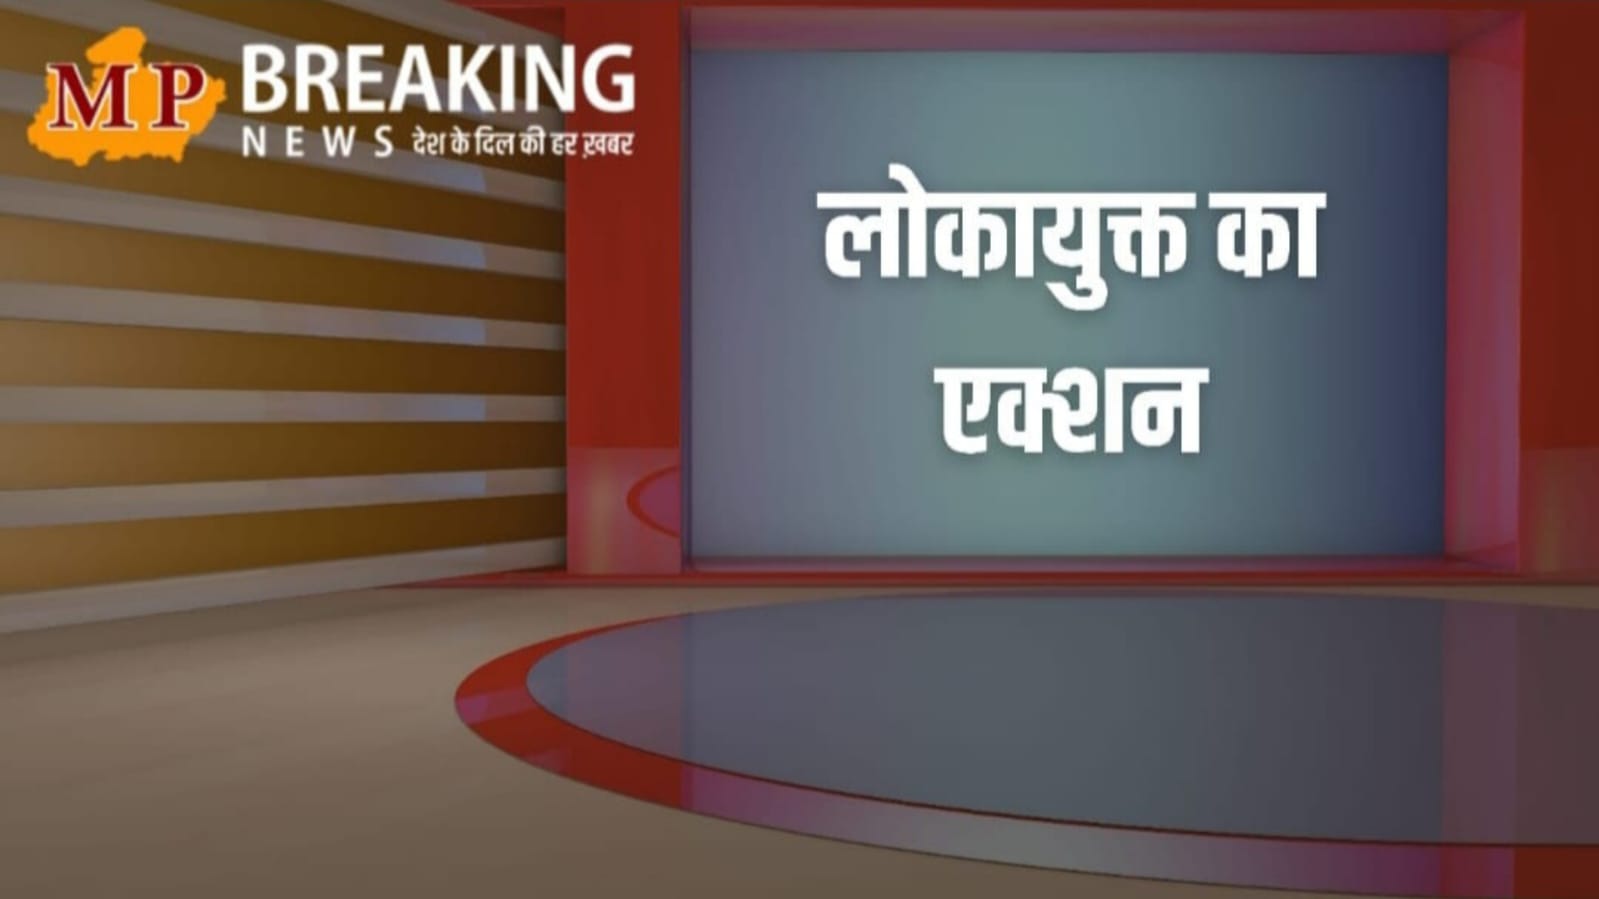 Balaghat News, Assistant Manager arrested taking bribe